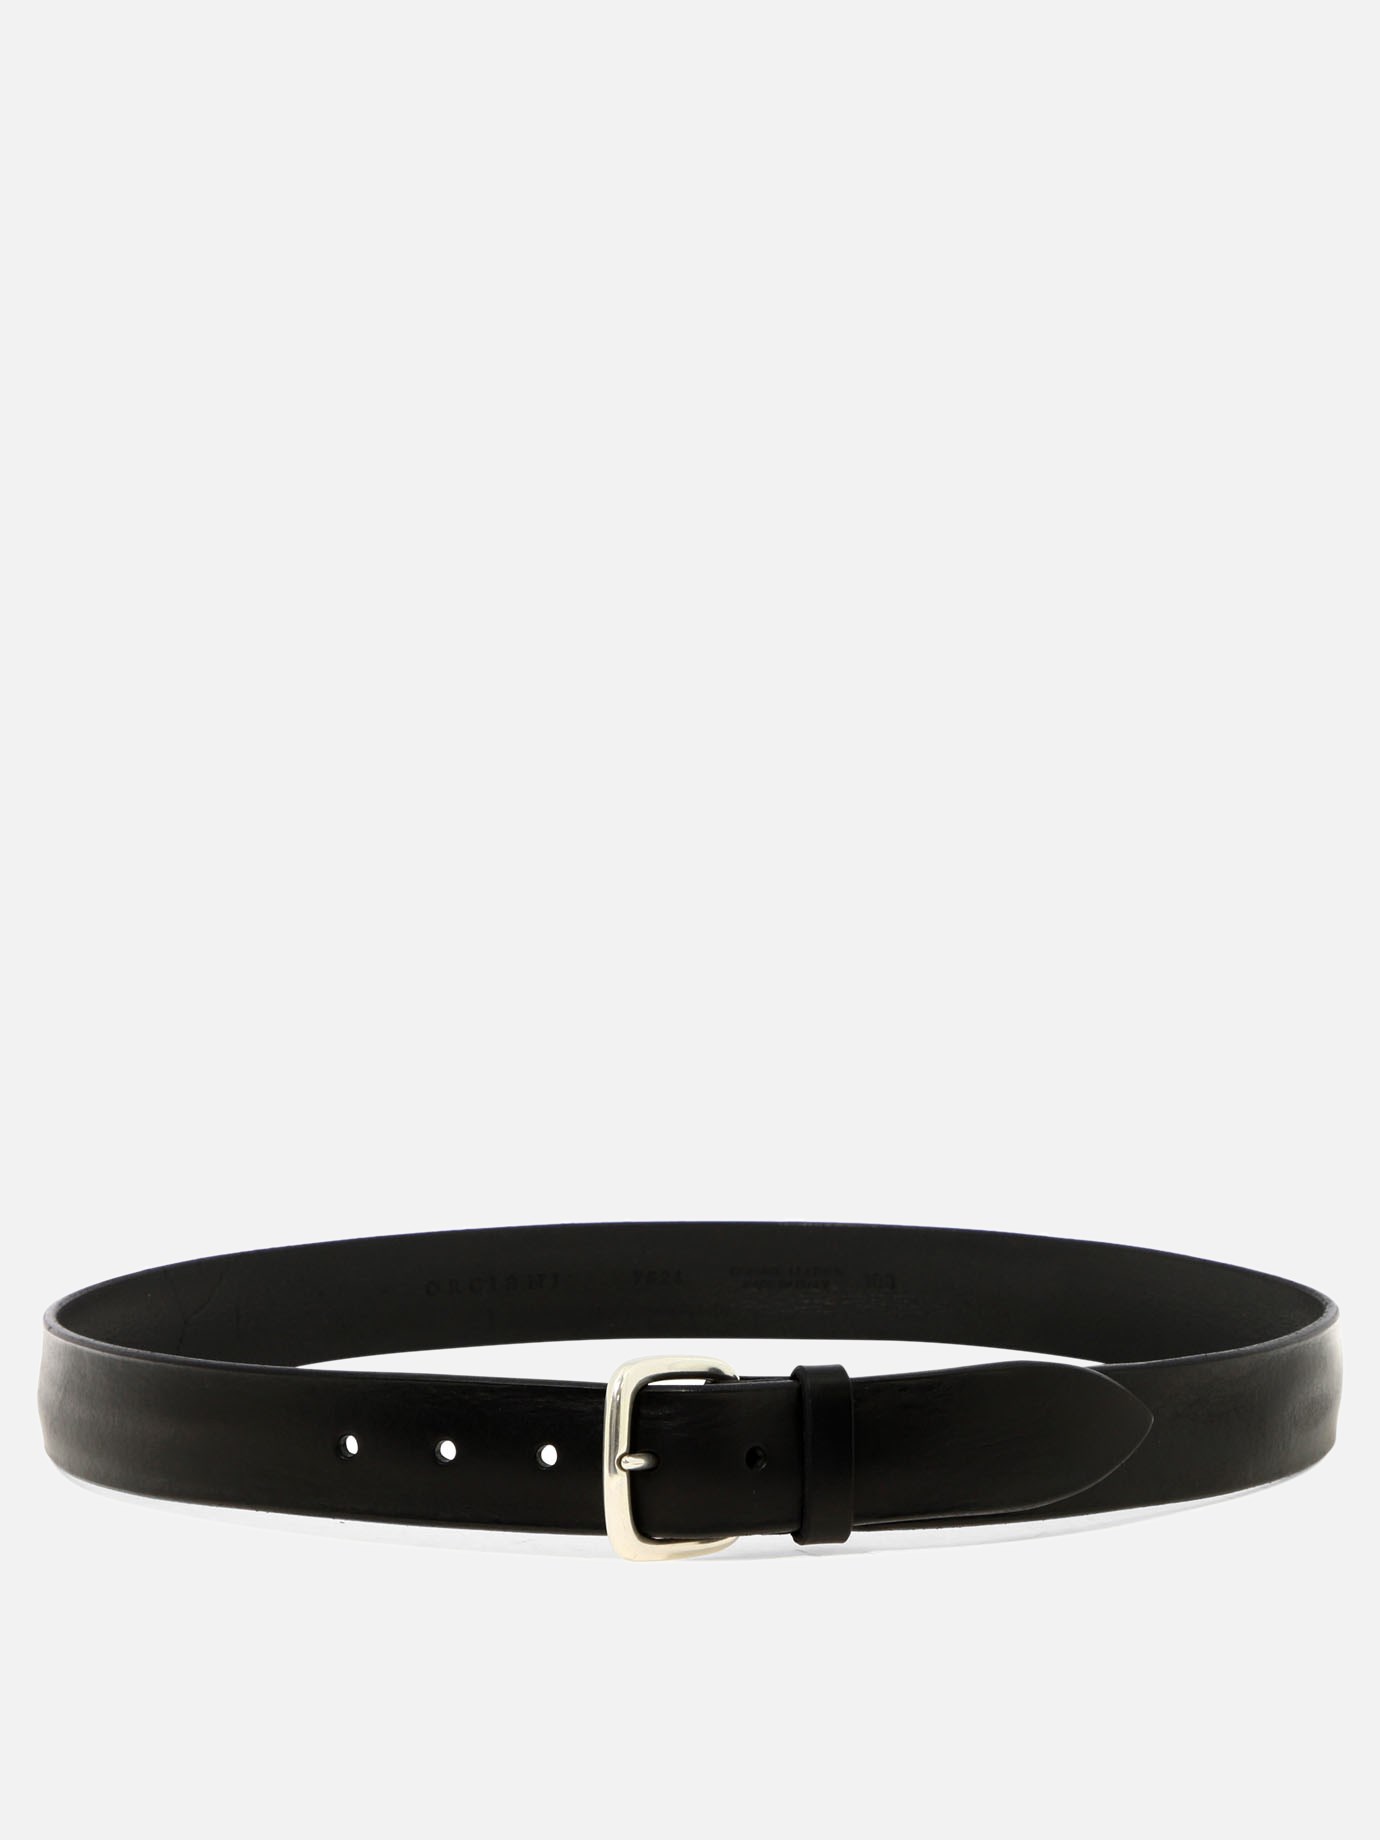 Bull Soft  beltby Orciani - 5